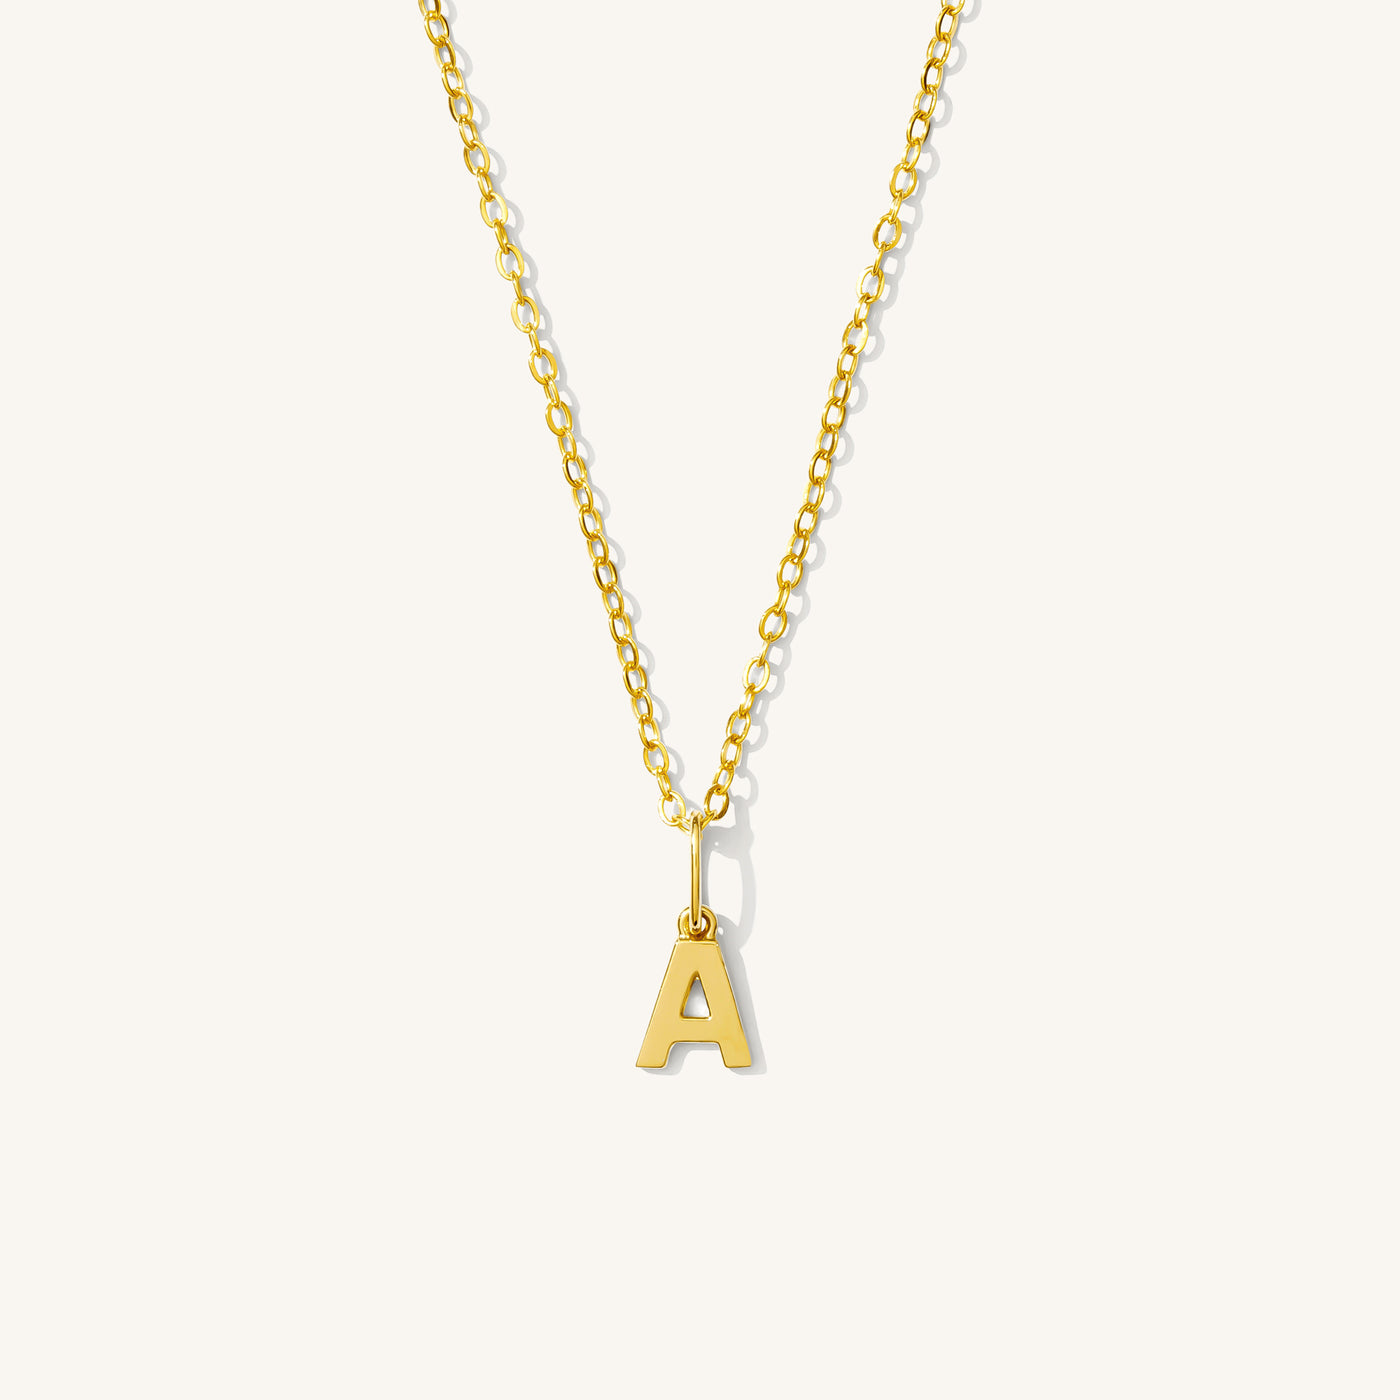 A Tiny Hanging Initial Necklace